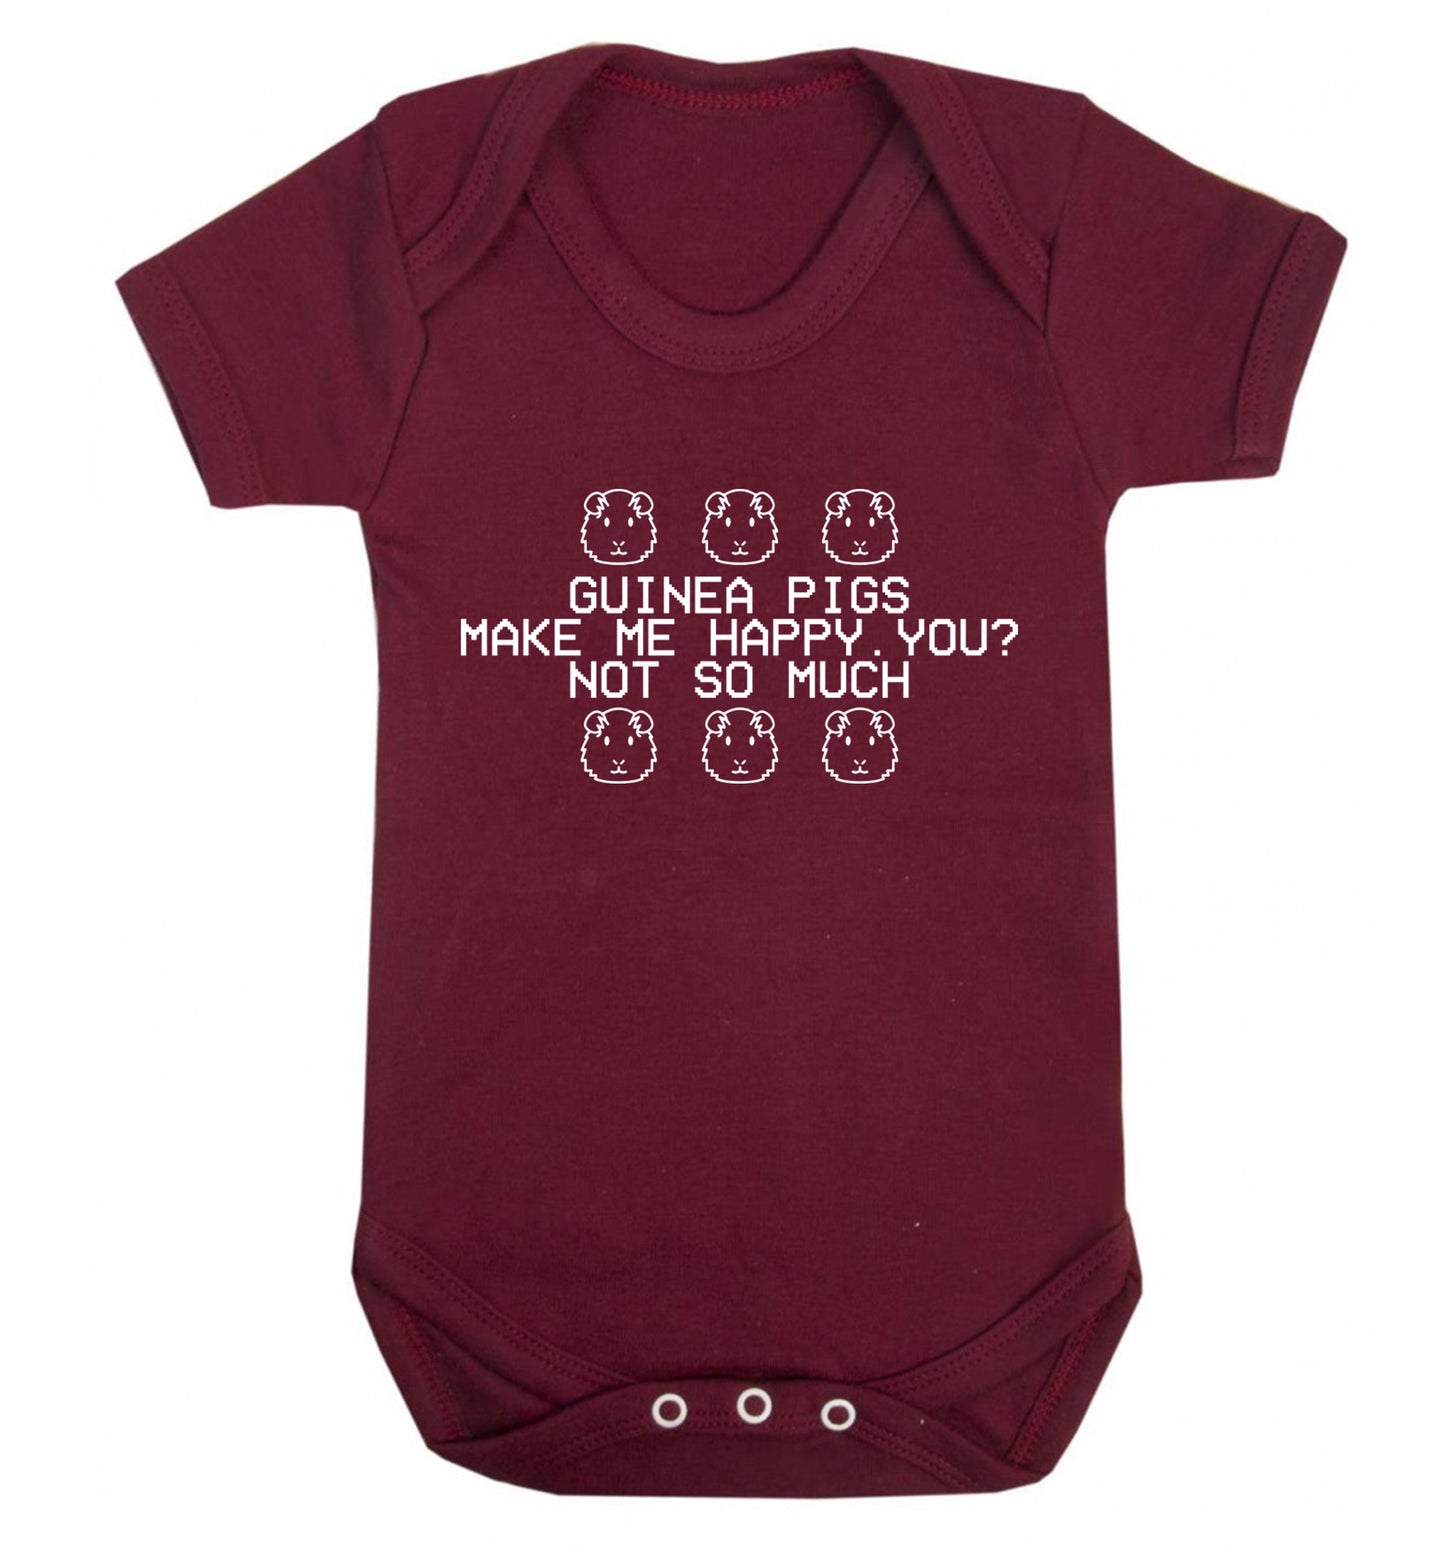 Guinea pigs make me happy, you not so much Baby Vest maroon 18-24 months